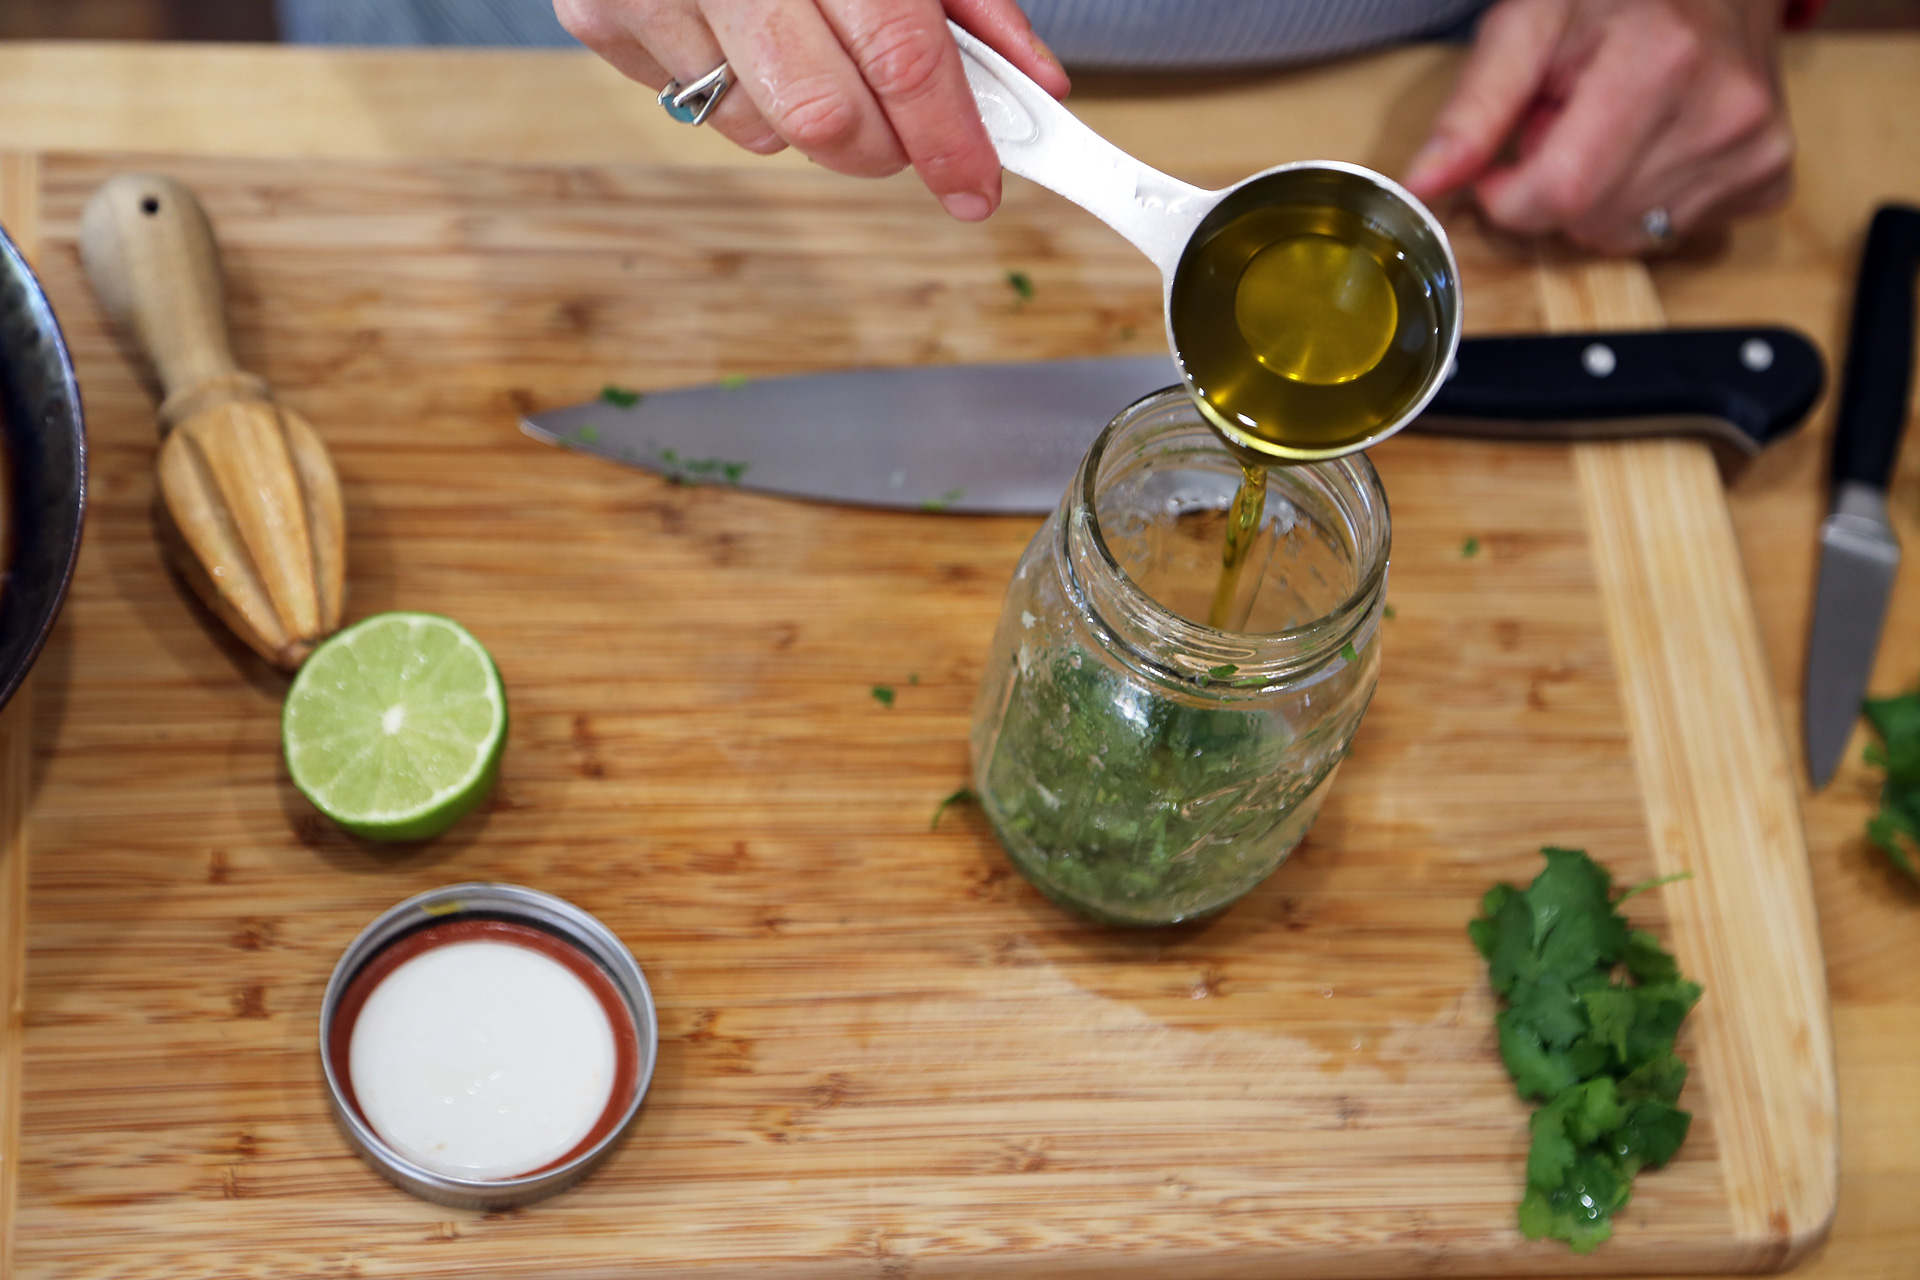 In a jar, combine the dressing ingredients, tighten on the lid, and shake wildly until well combined.